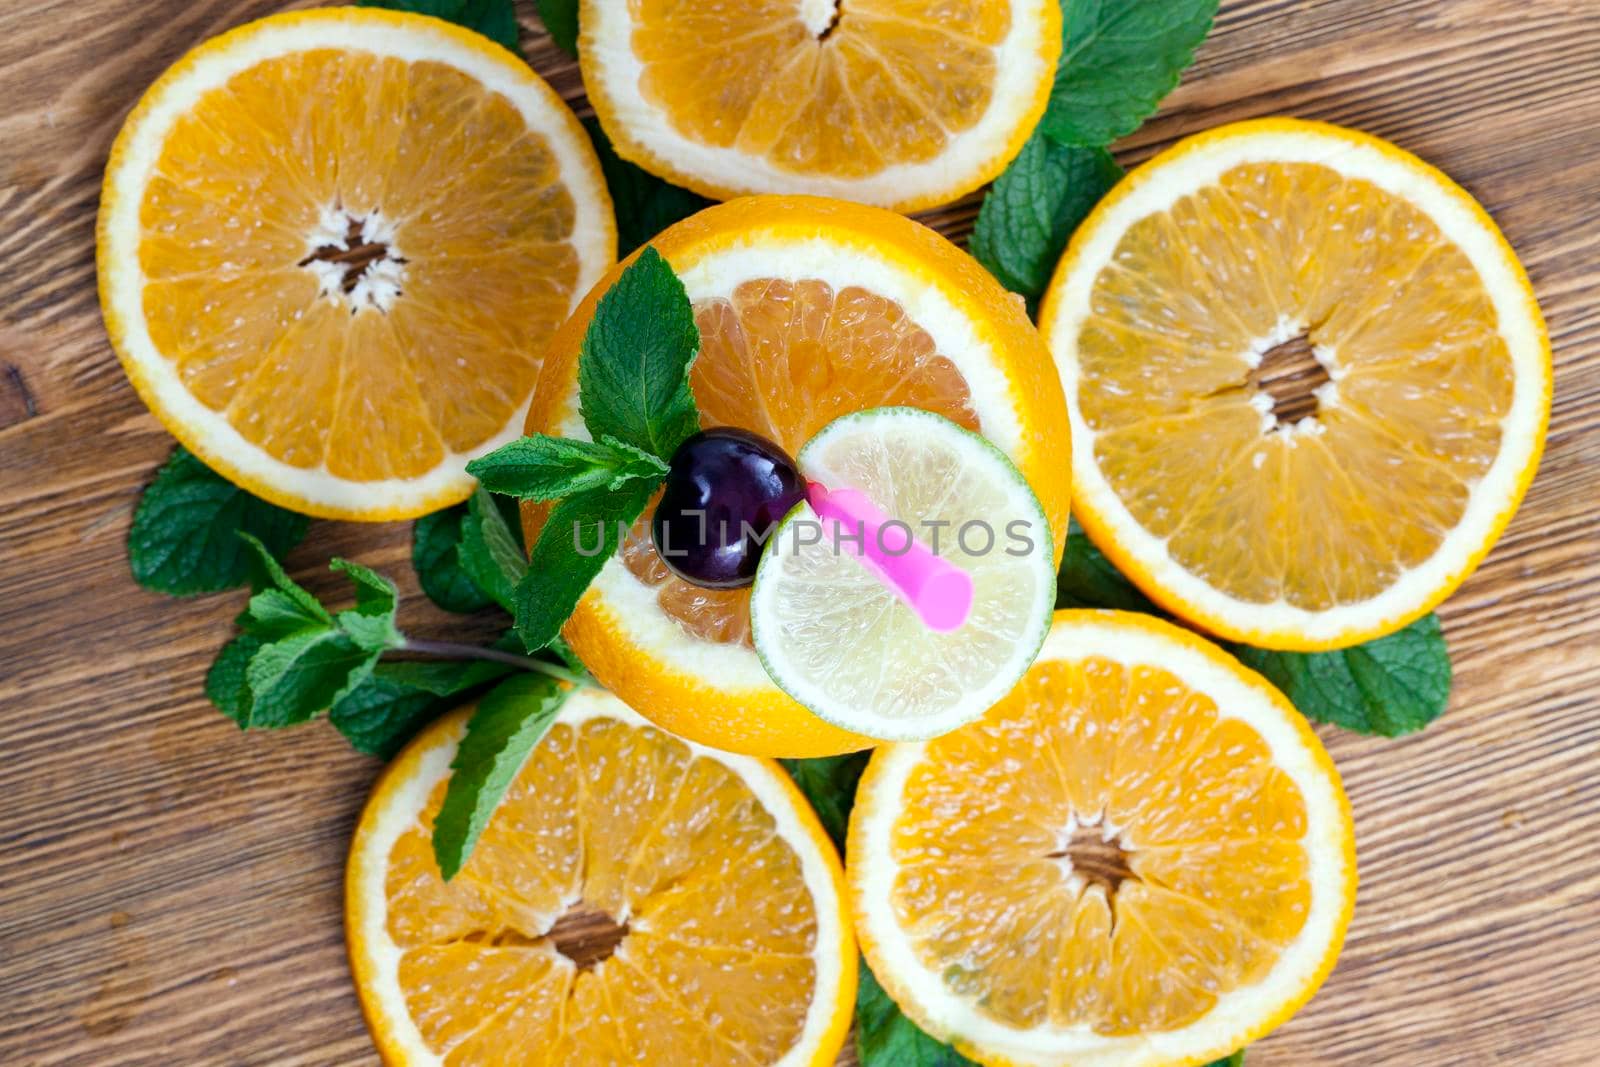 close-up photo of an orange cut into slices. Pieces of fruit lie on an old wooden table